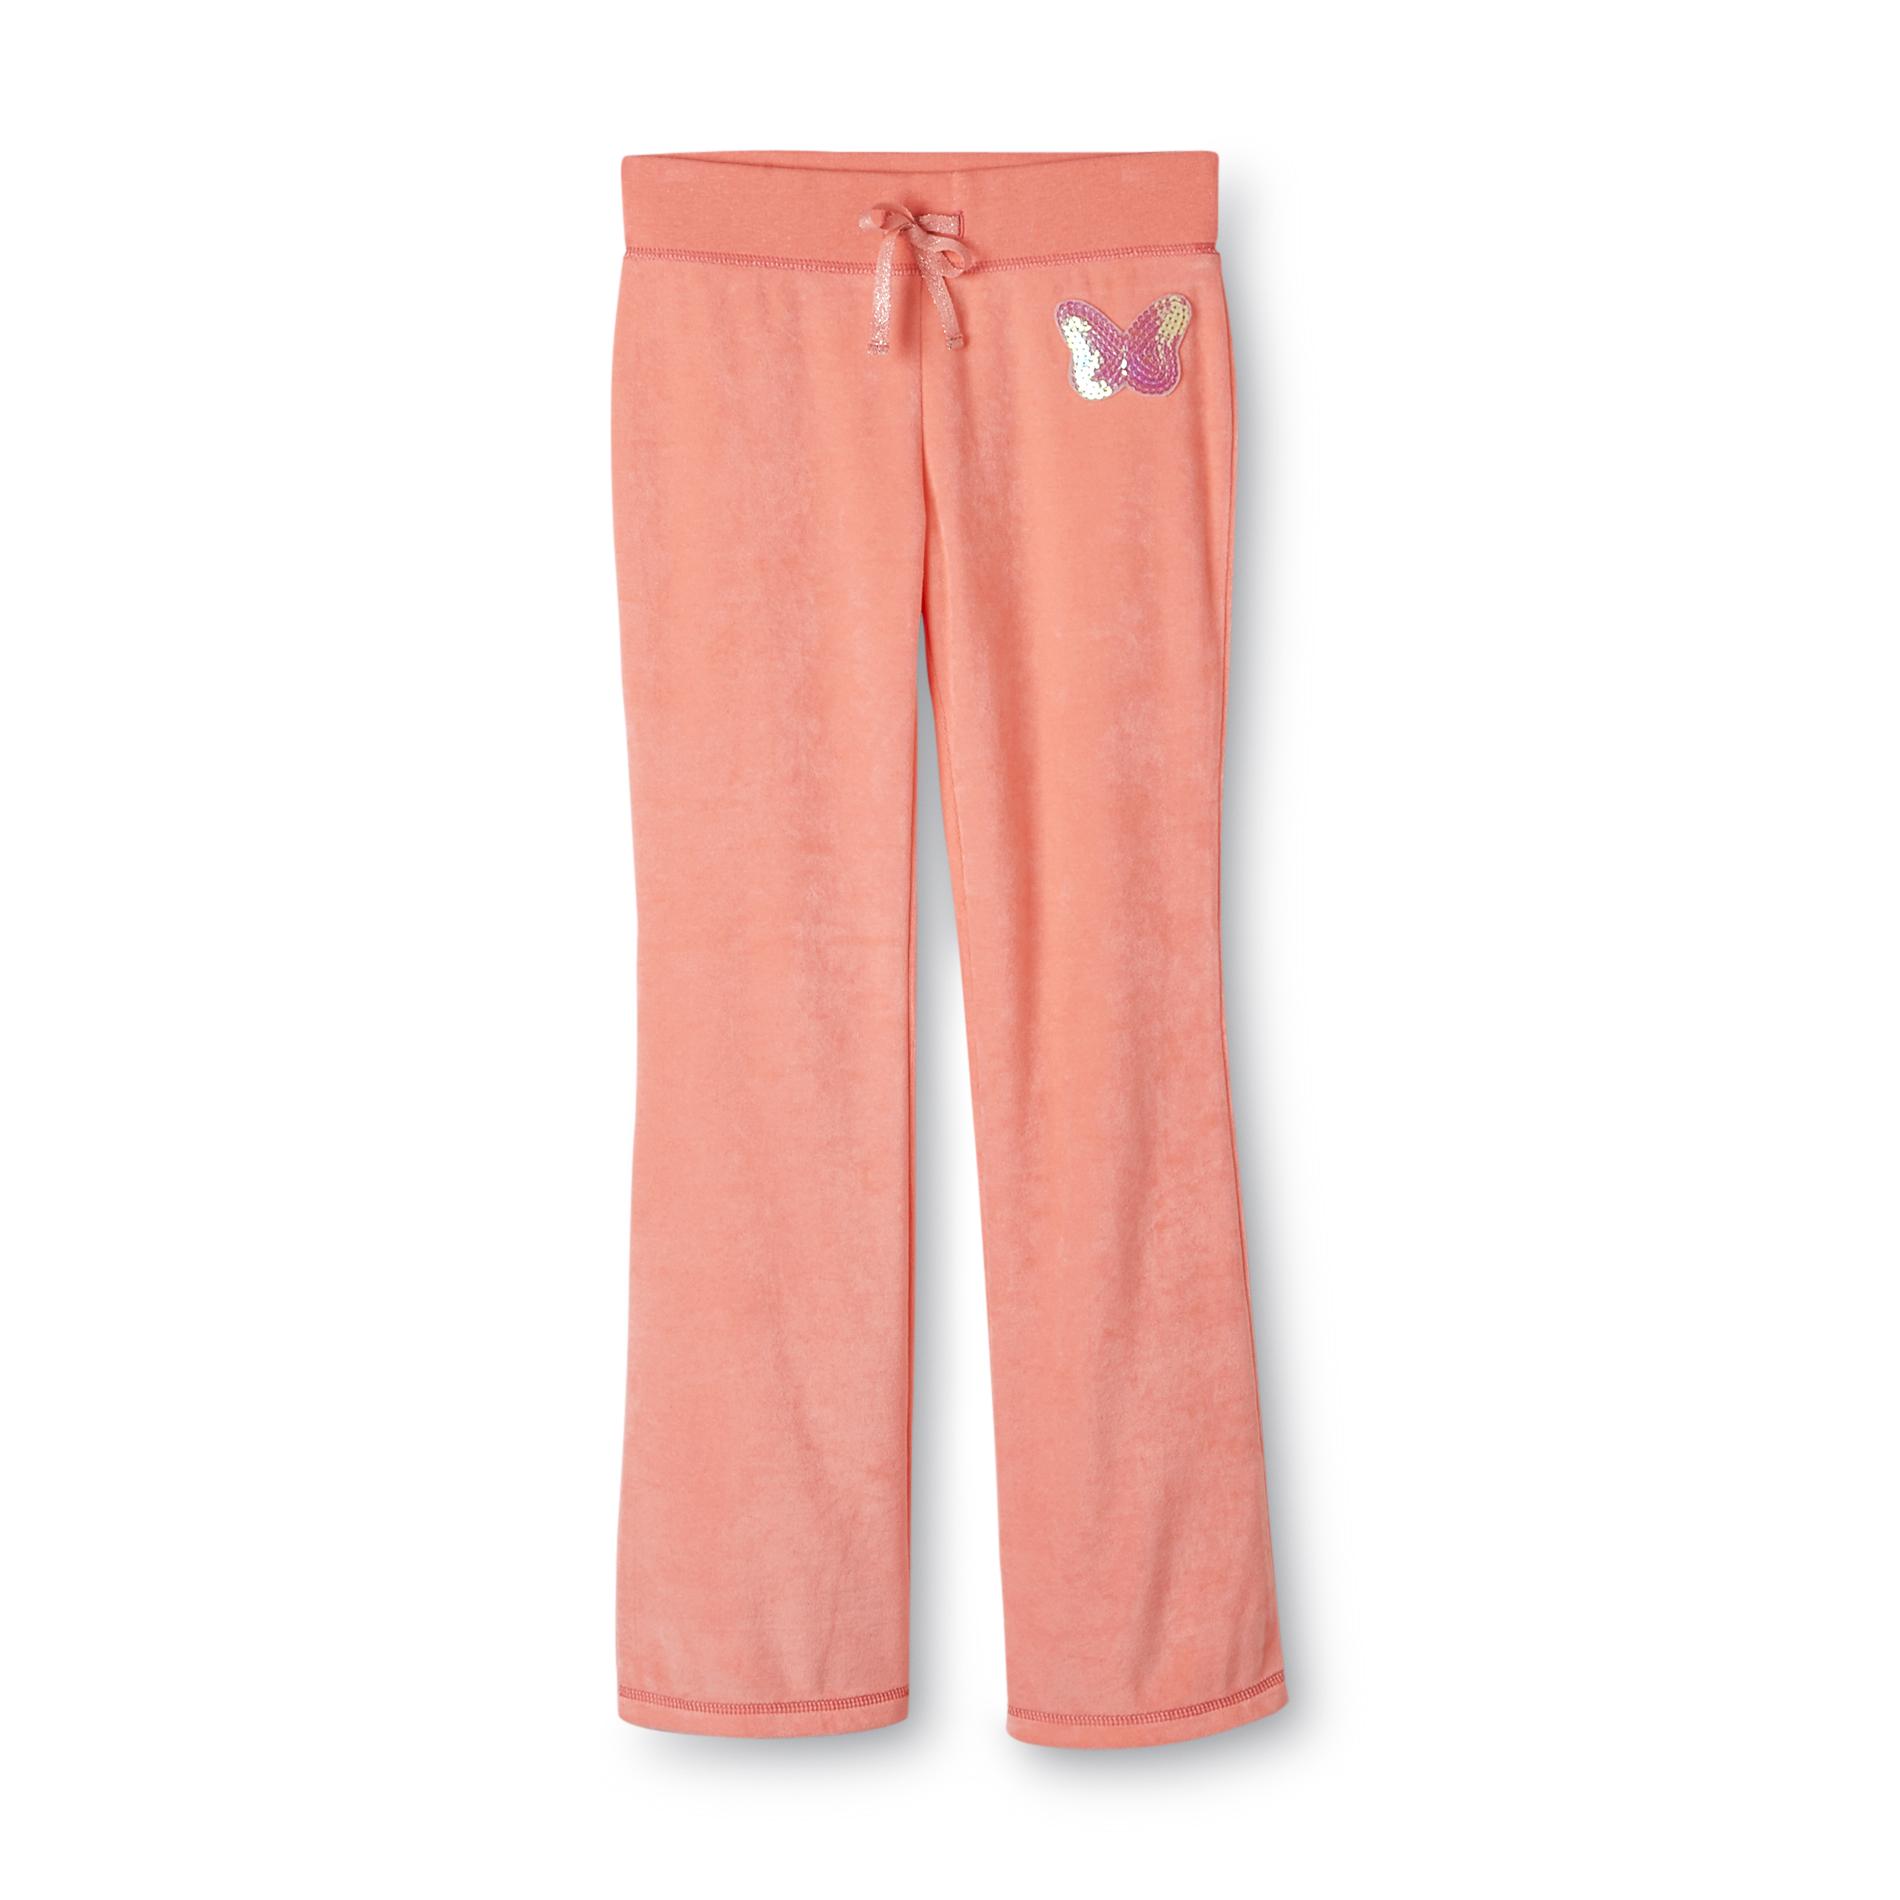 Basic Editions Girl's Velour Pants - Butterfly